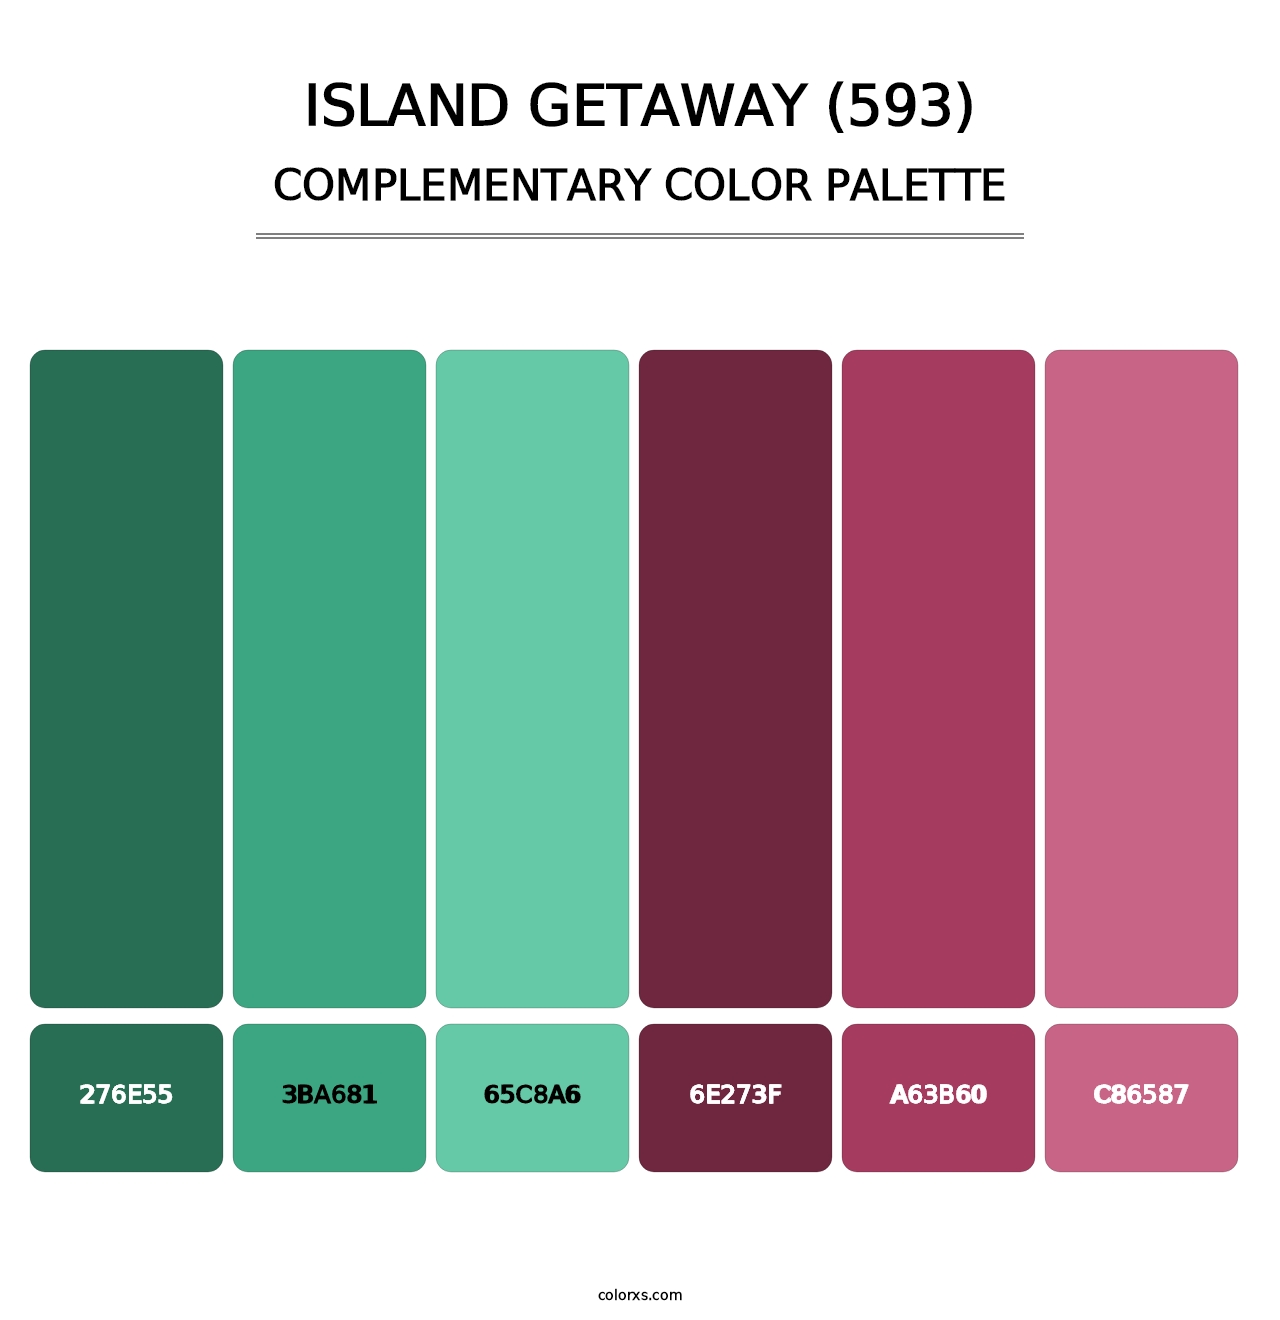 Island Getaway (593) - Complementary Color Palette